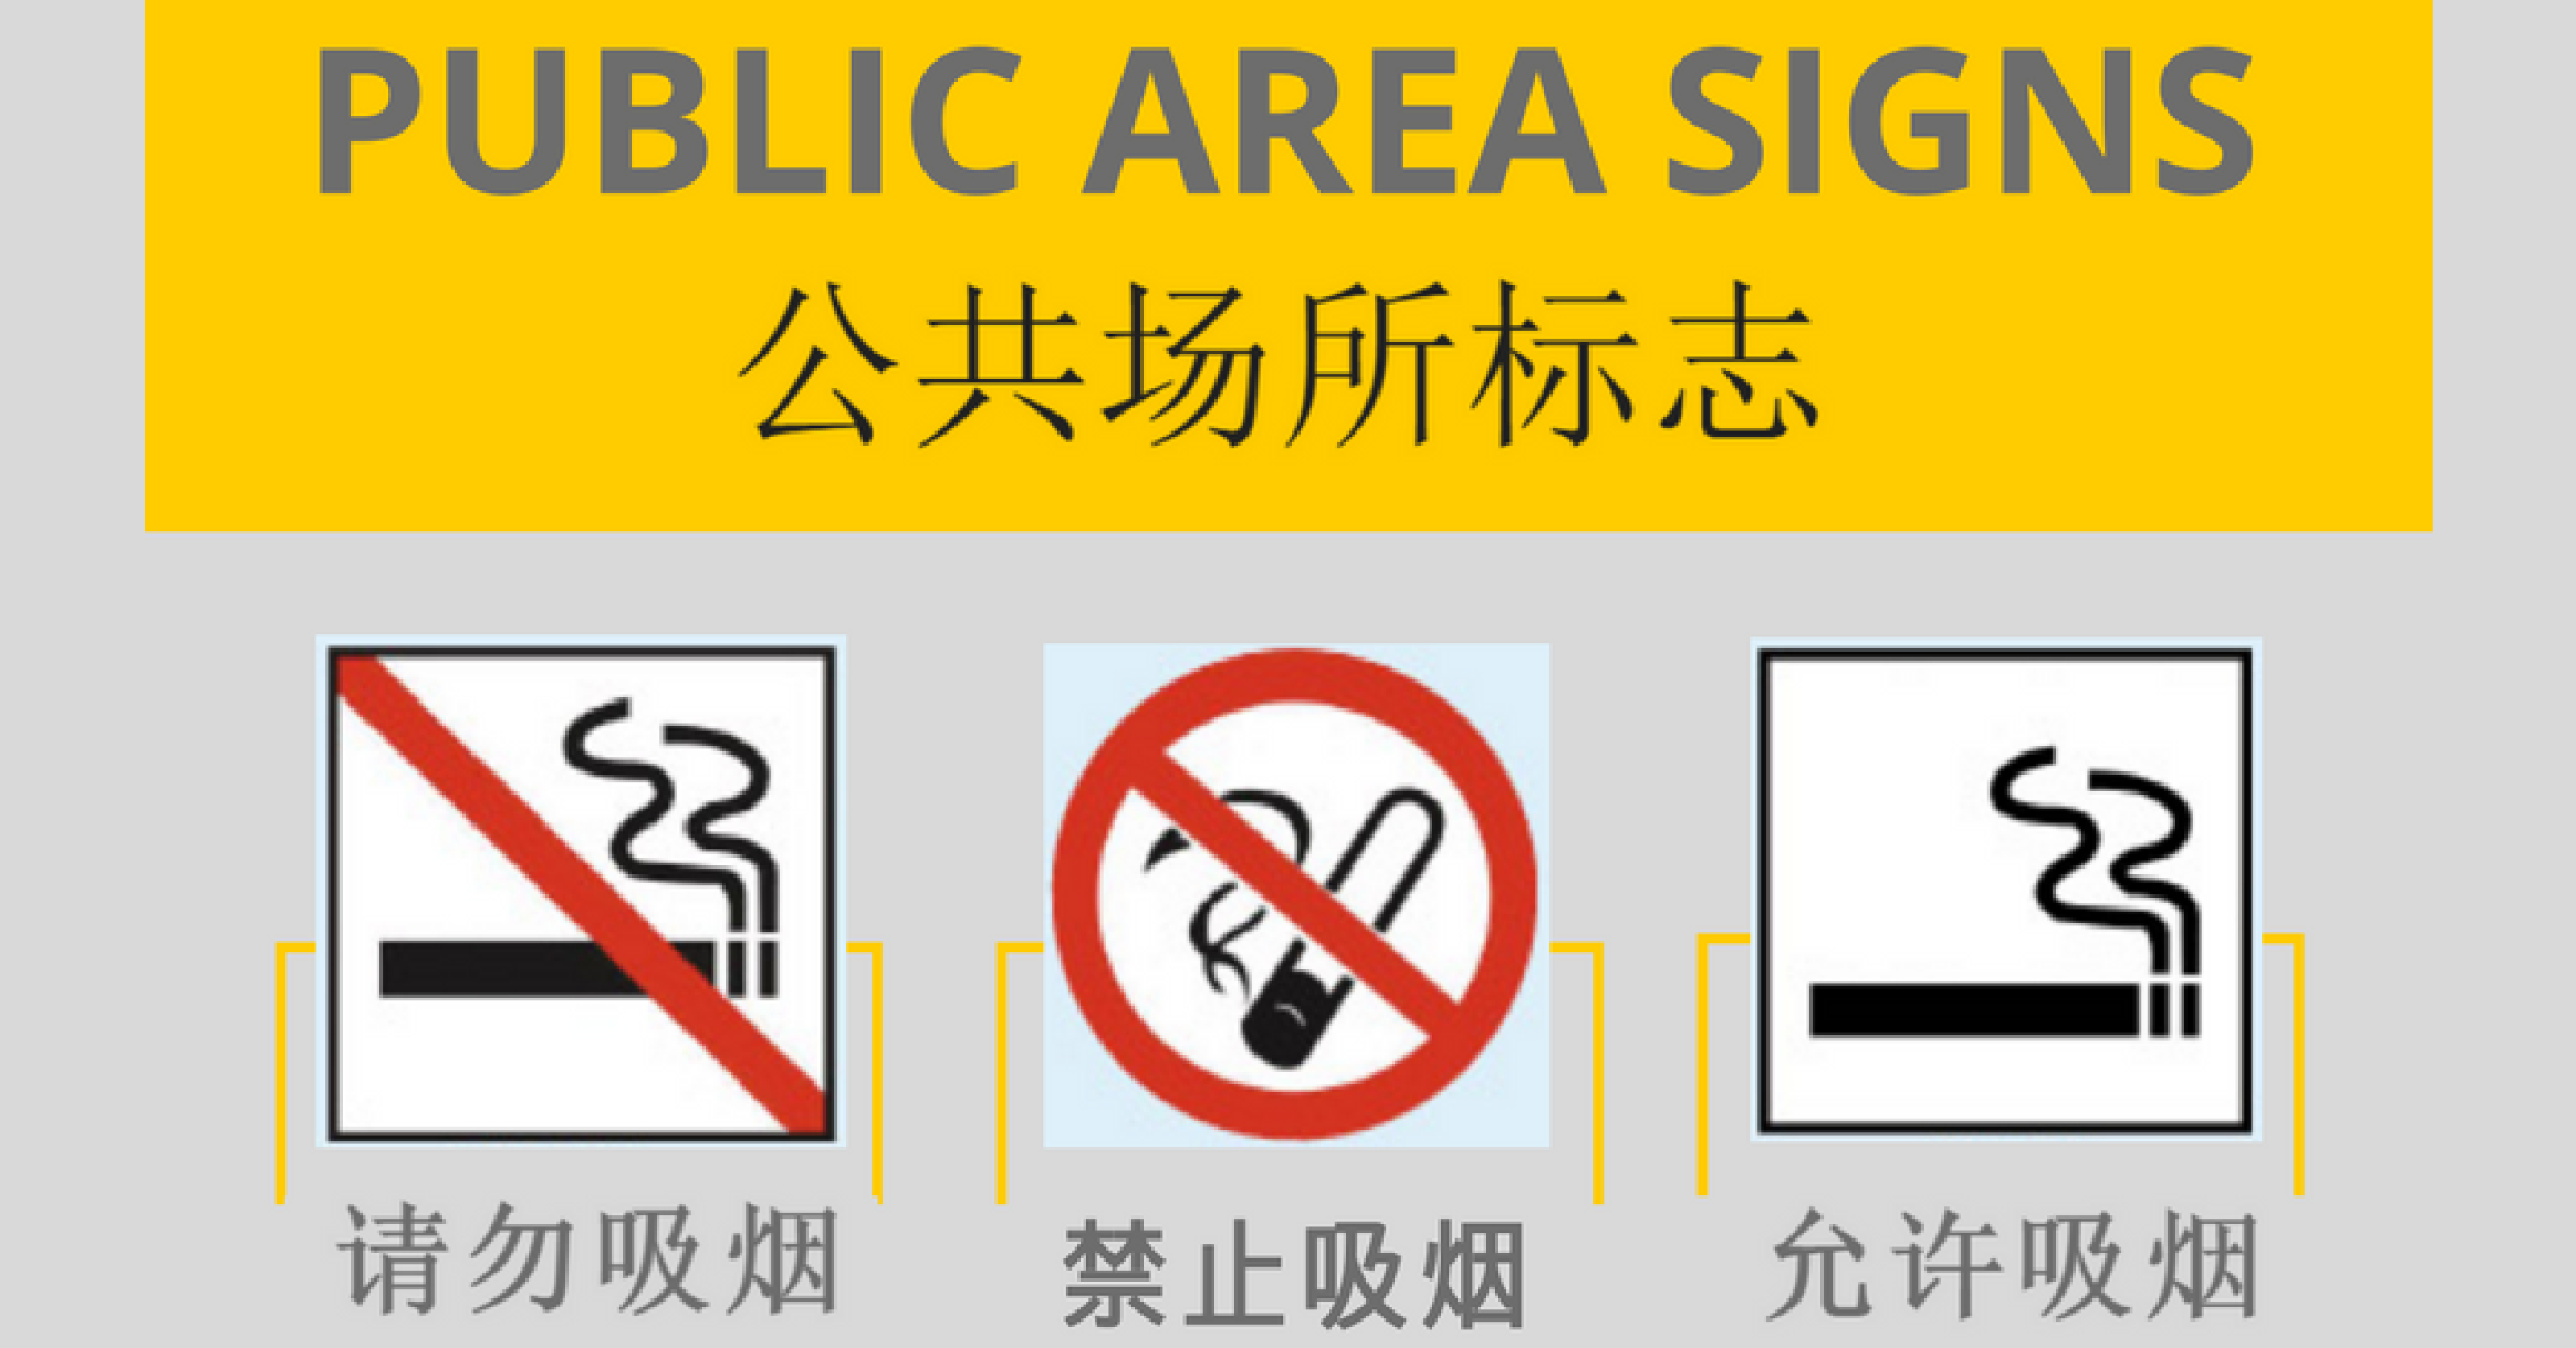 Common Chinese Public Area Signs